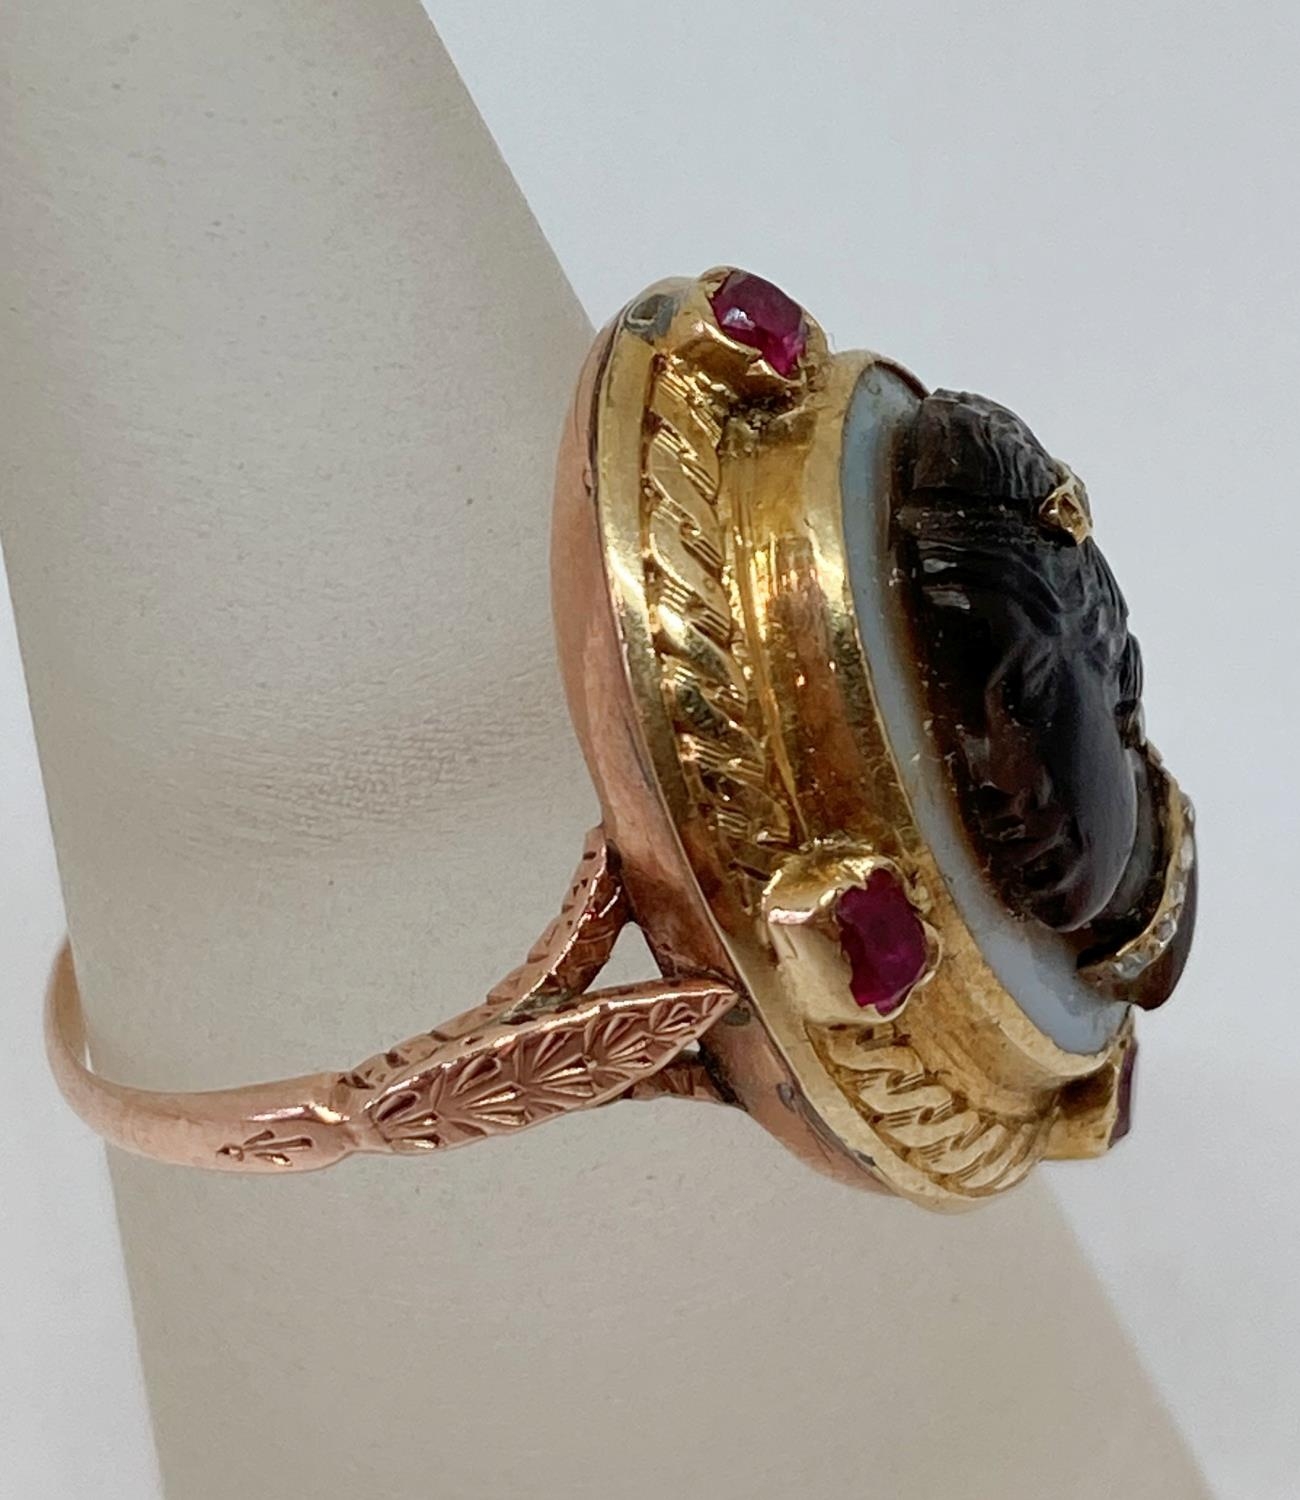 Fine antique blackamoor cameo ring depicting a lady, the agate cameo set with rose cut diamonds - Image 2 of 9